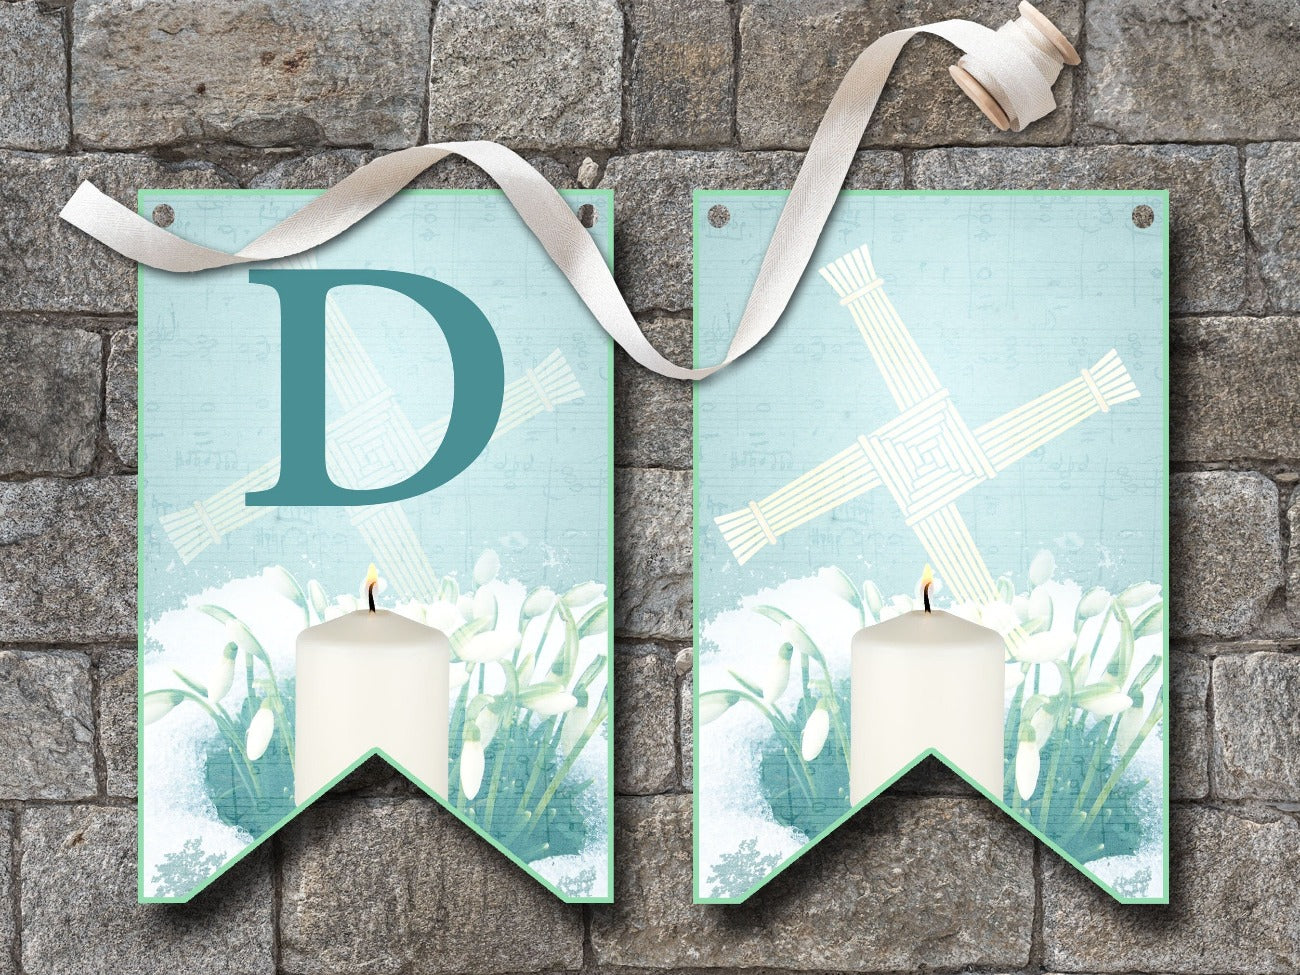 IMBOLC BANNER Bunting, Flags D and SPACER FLAG with no letter, flags are pale blue with dark blue letters, each flag is imbellished with a Brigids Cross, snowdrops peeking through a layer of snow and a lit white candle - Morgana Magick Spell